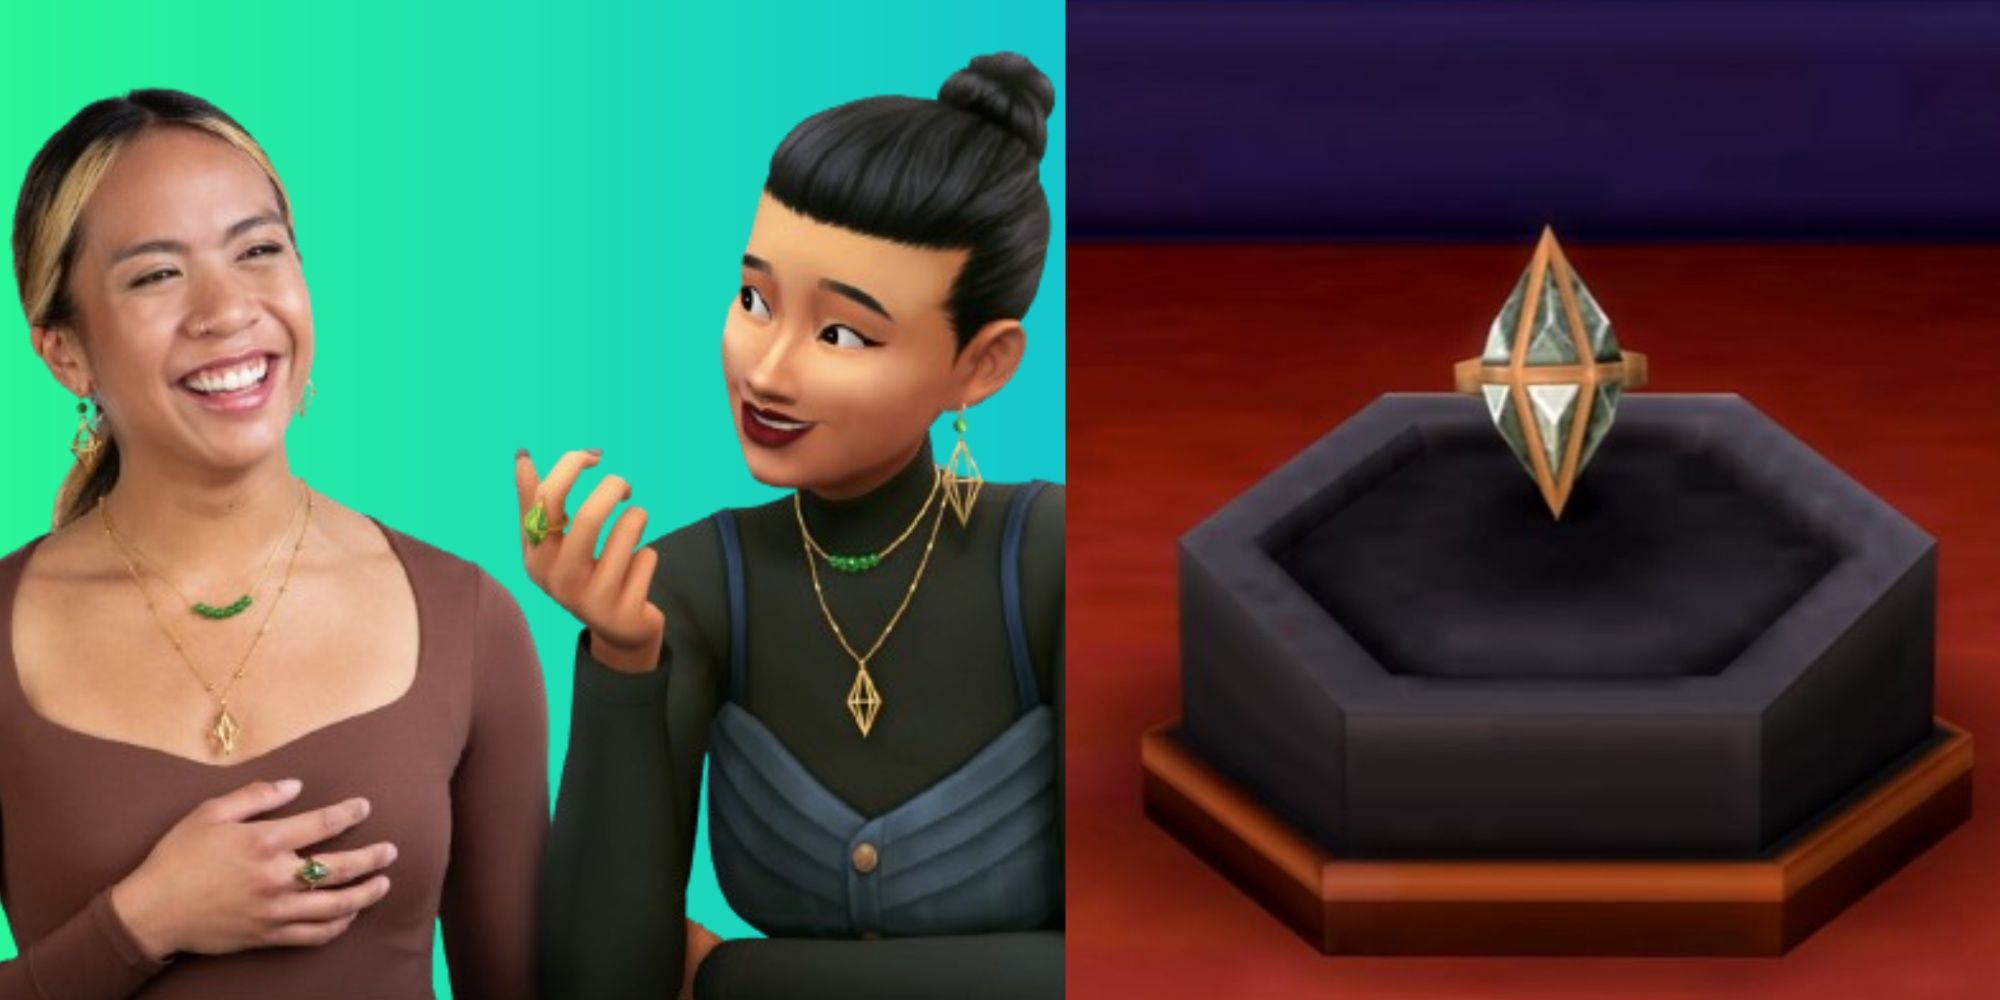 woman and sims woman wearing matching jewelry, and a sims plumbob pendant